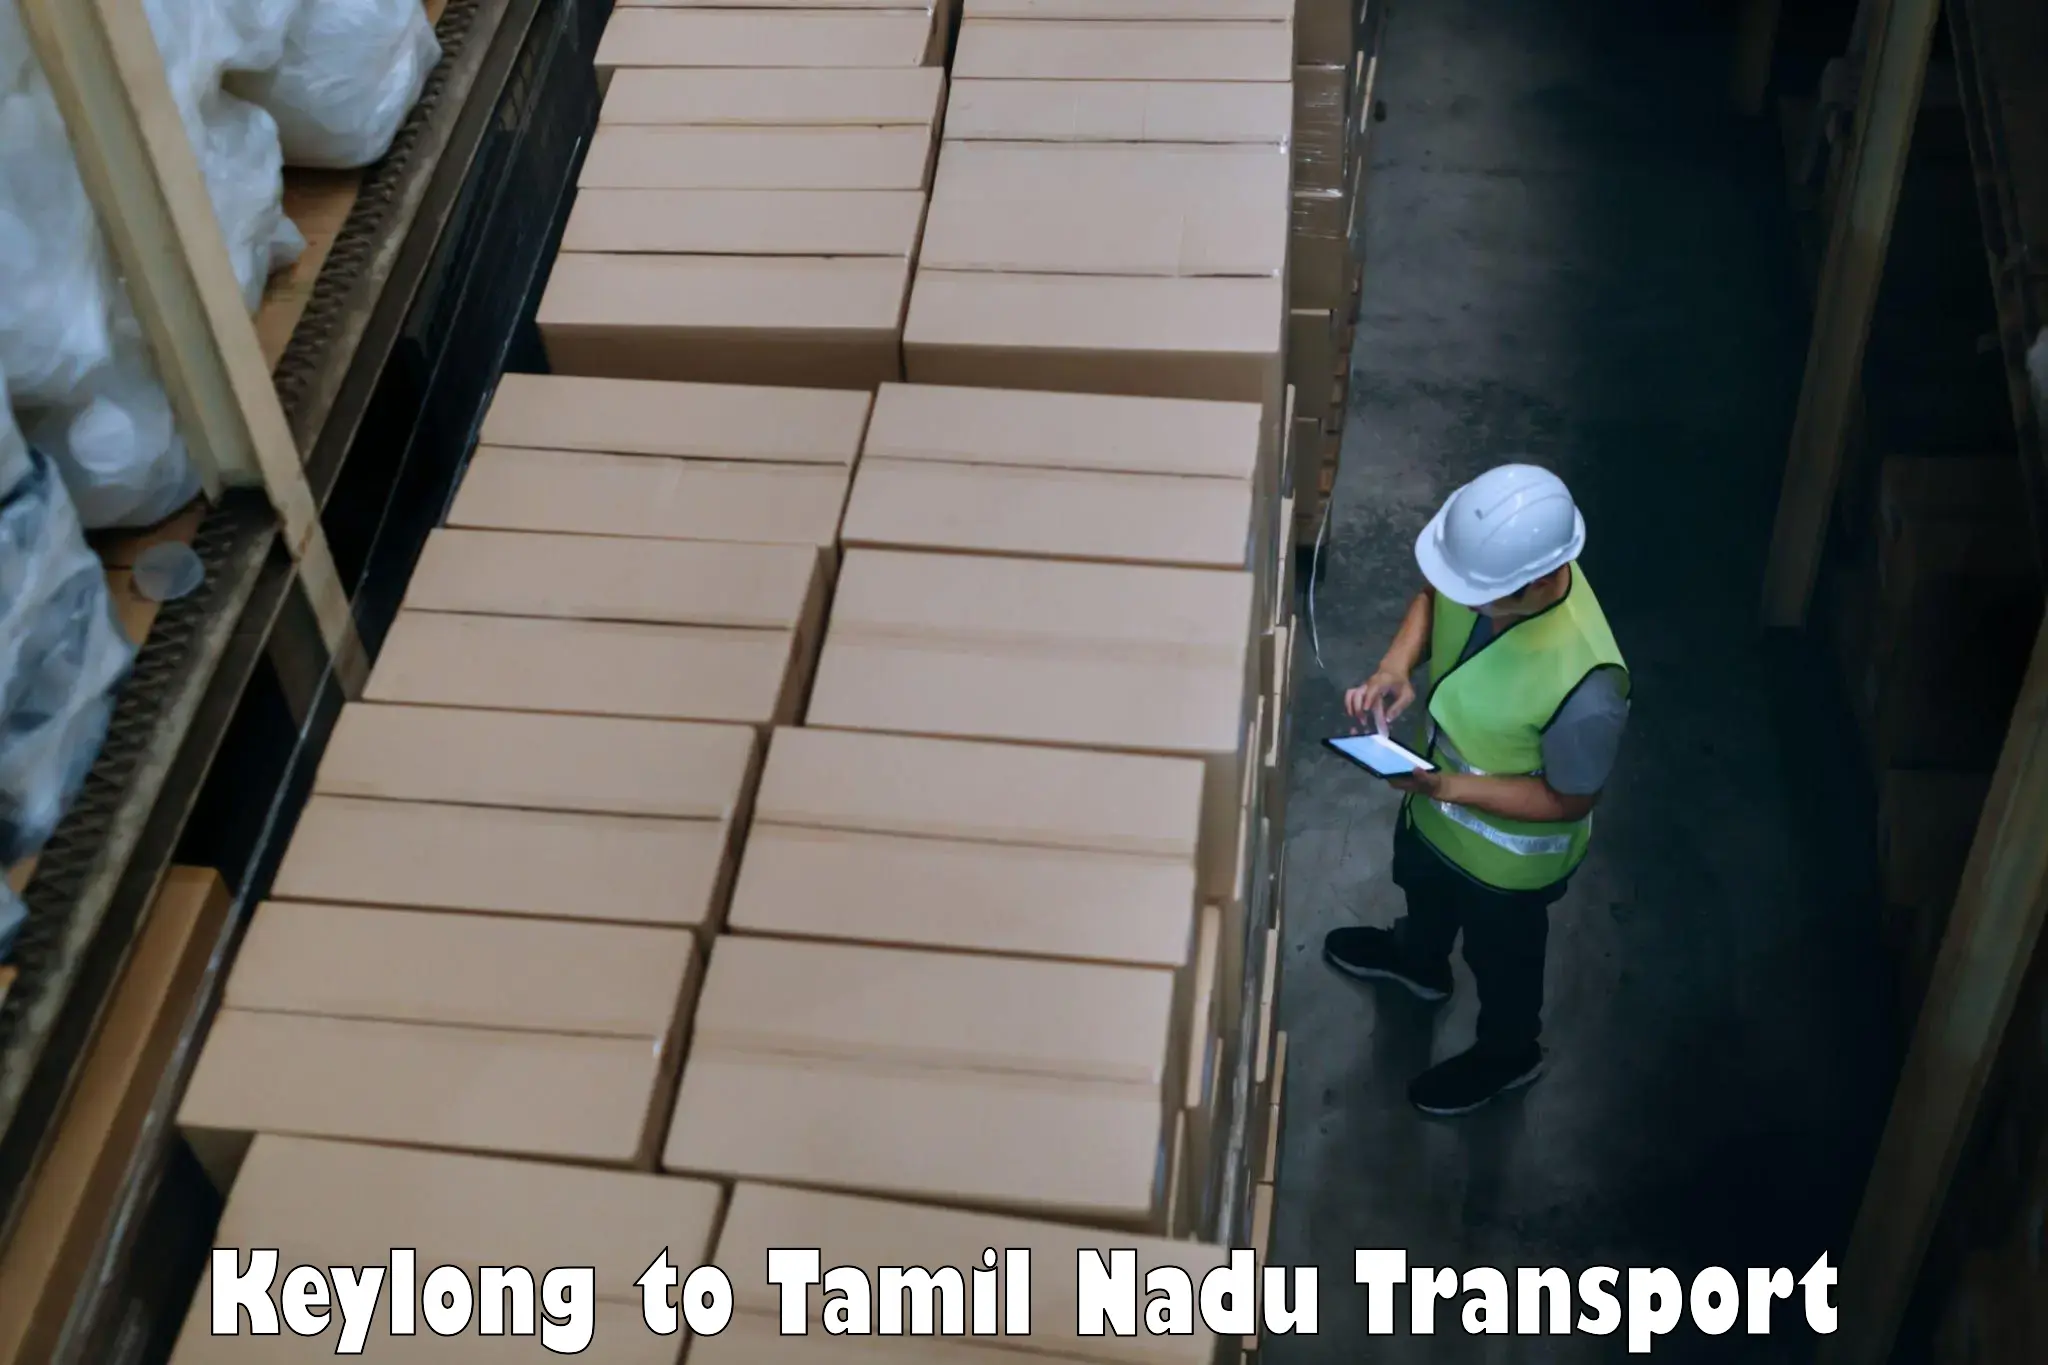 Truck transport companies in India Keylong to Trichy